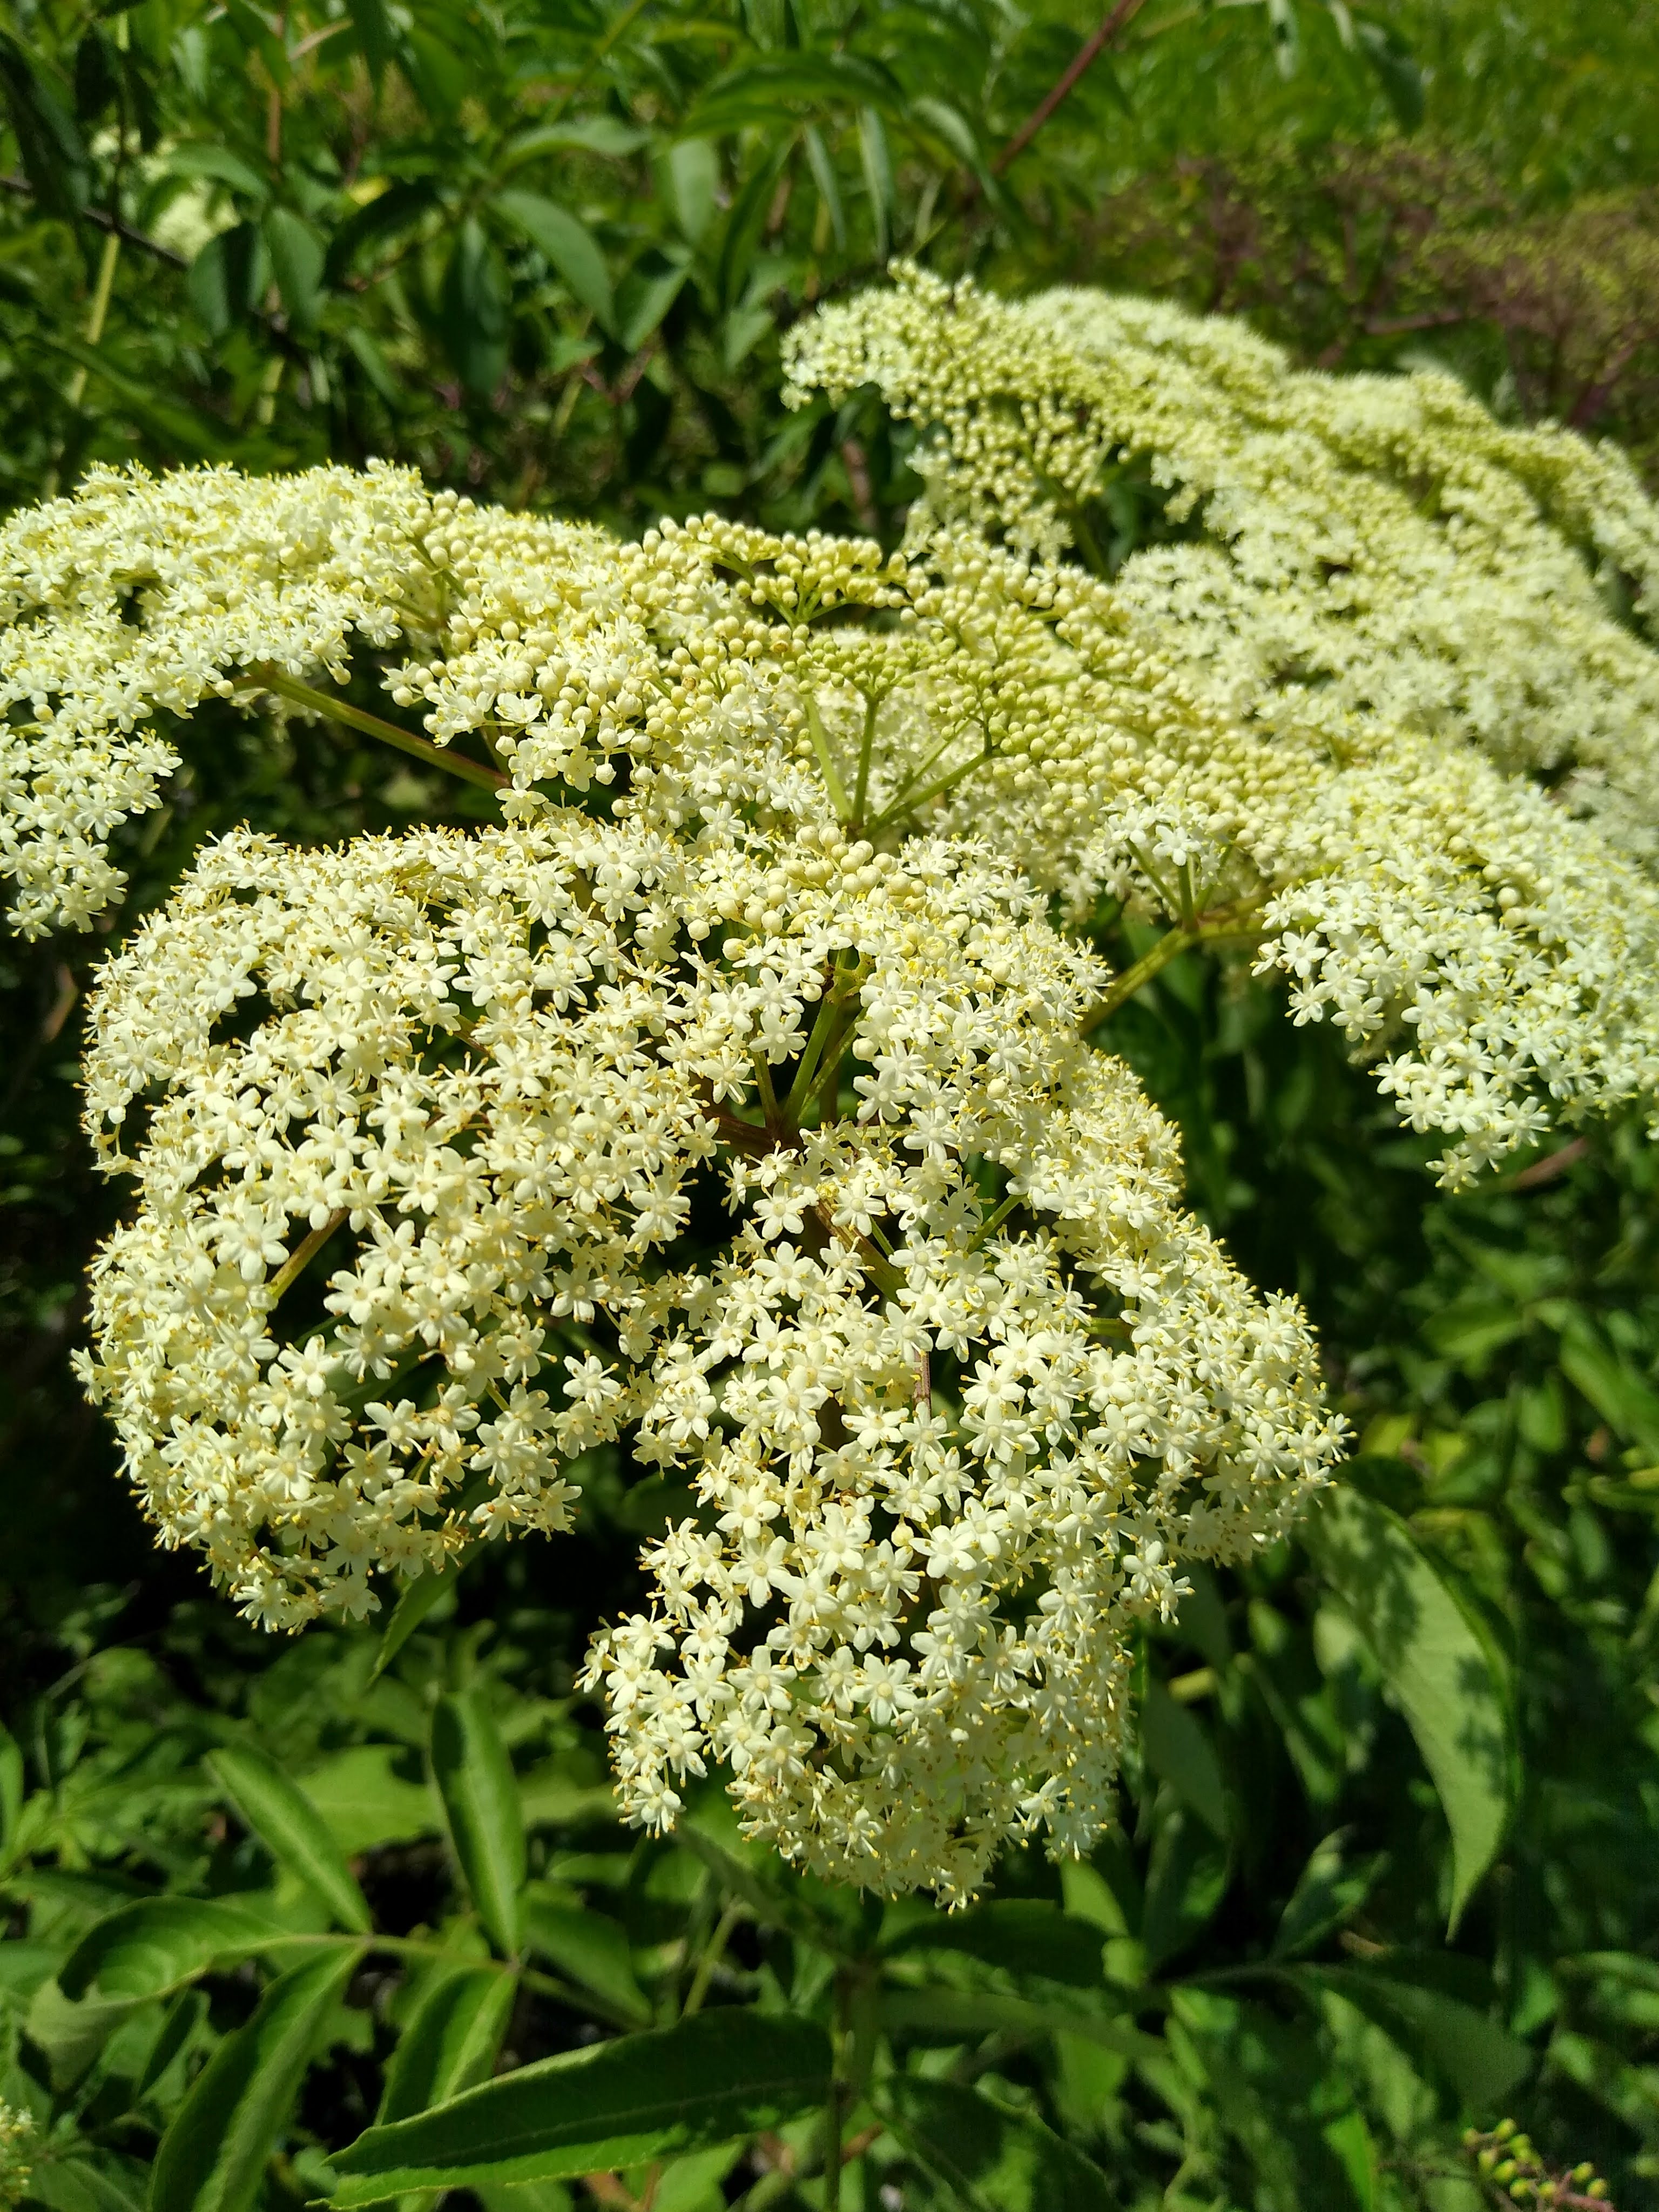 Clusters of white flowers